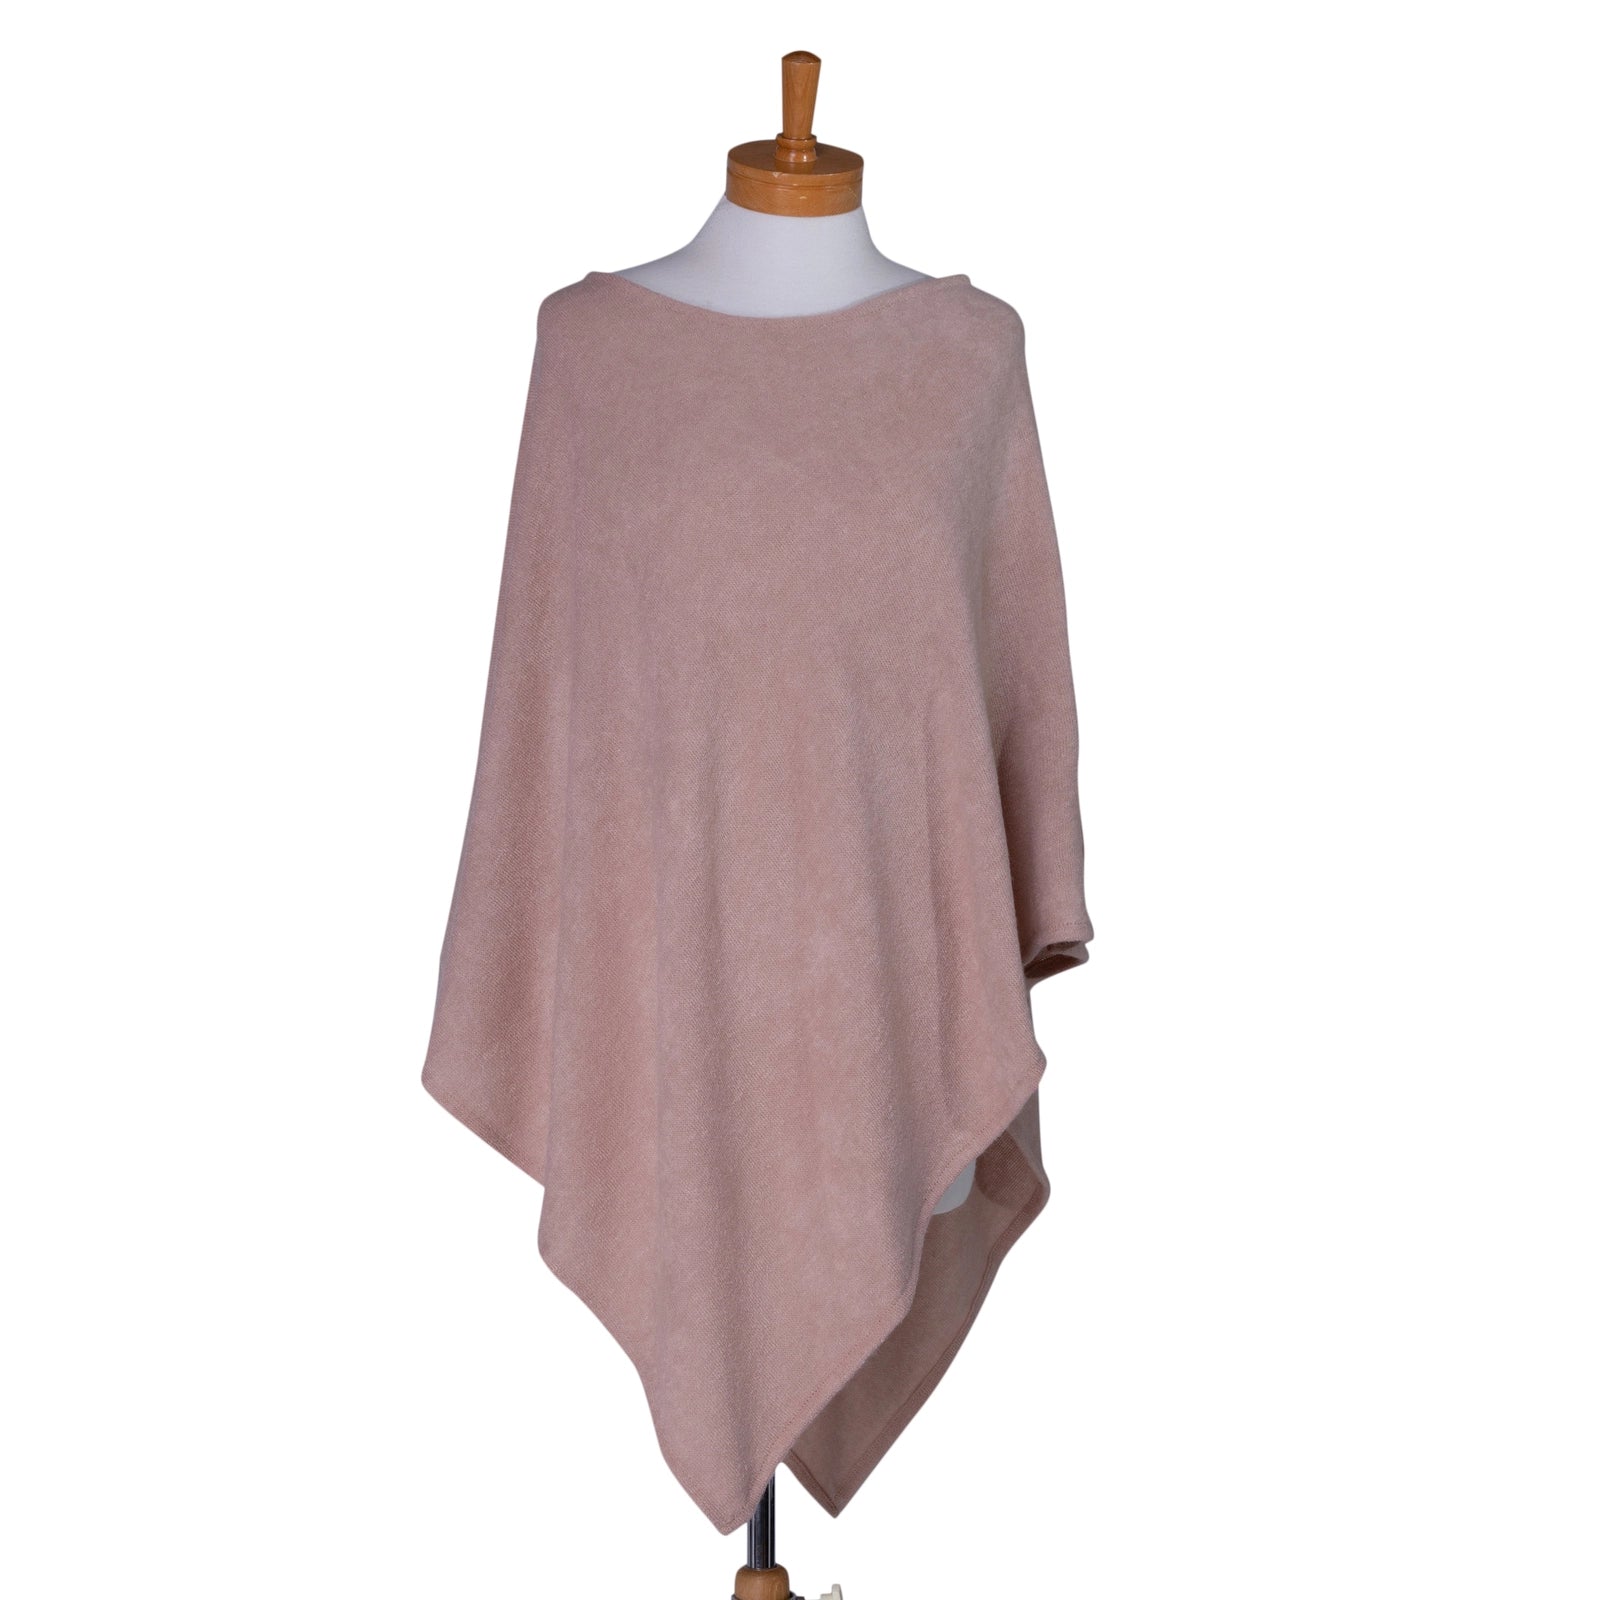 Taylor Hill Poncho - Soft Pink